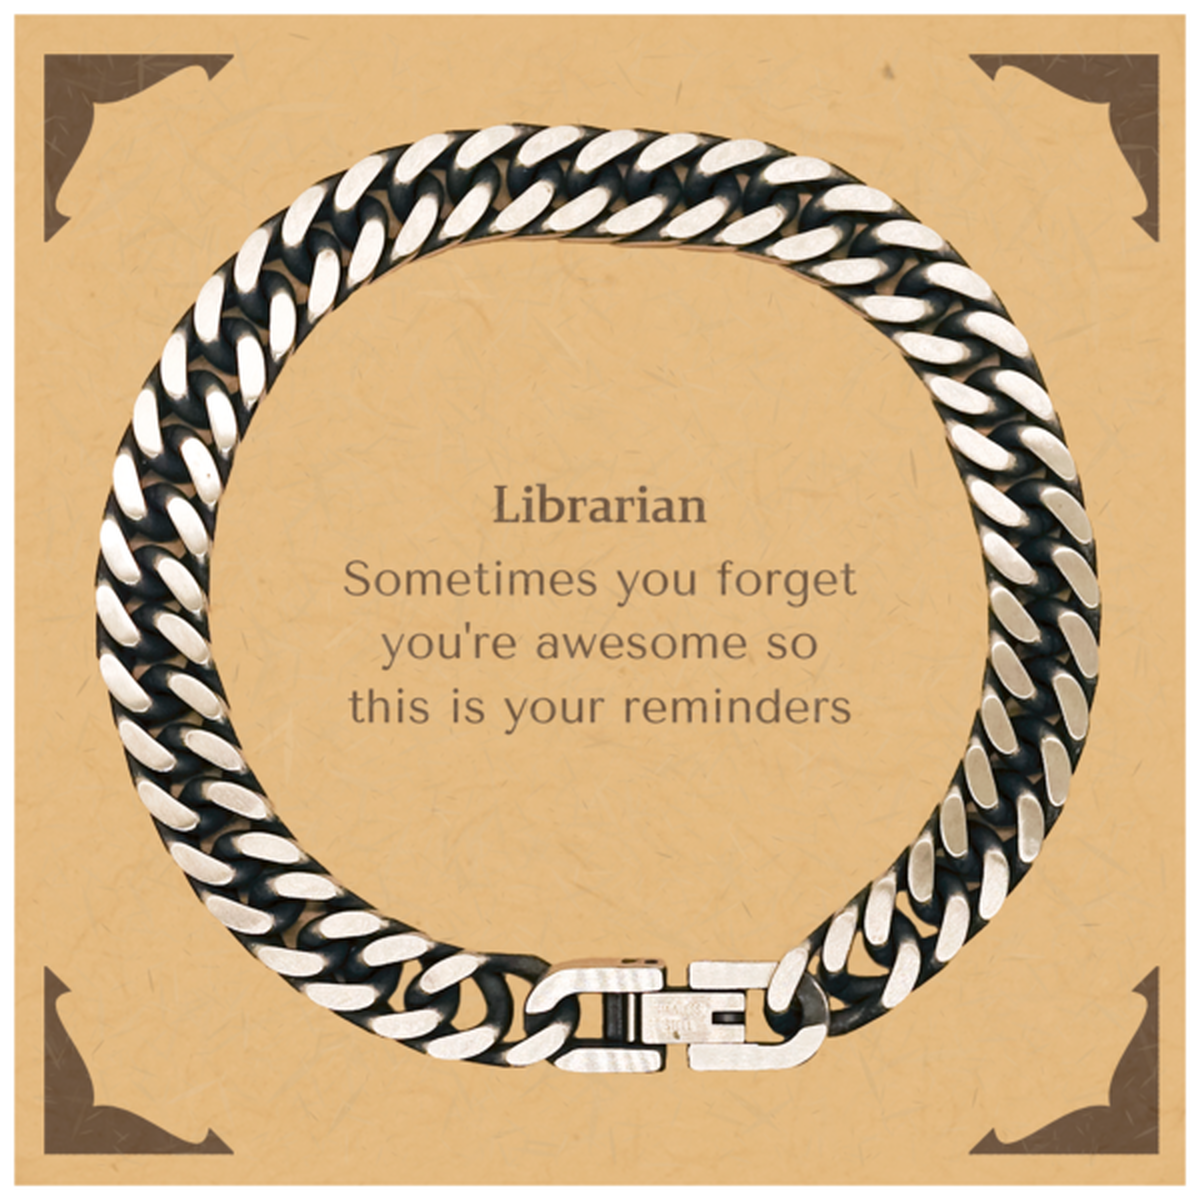 Sentimental Librarian Cuban Link Chain Bracelet, Librarian Sometimes you forget you're awesome so this is your reminders, Graduation Christmas Birthday Gifts for Librarian, Men, Women, Coworkers